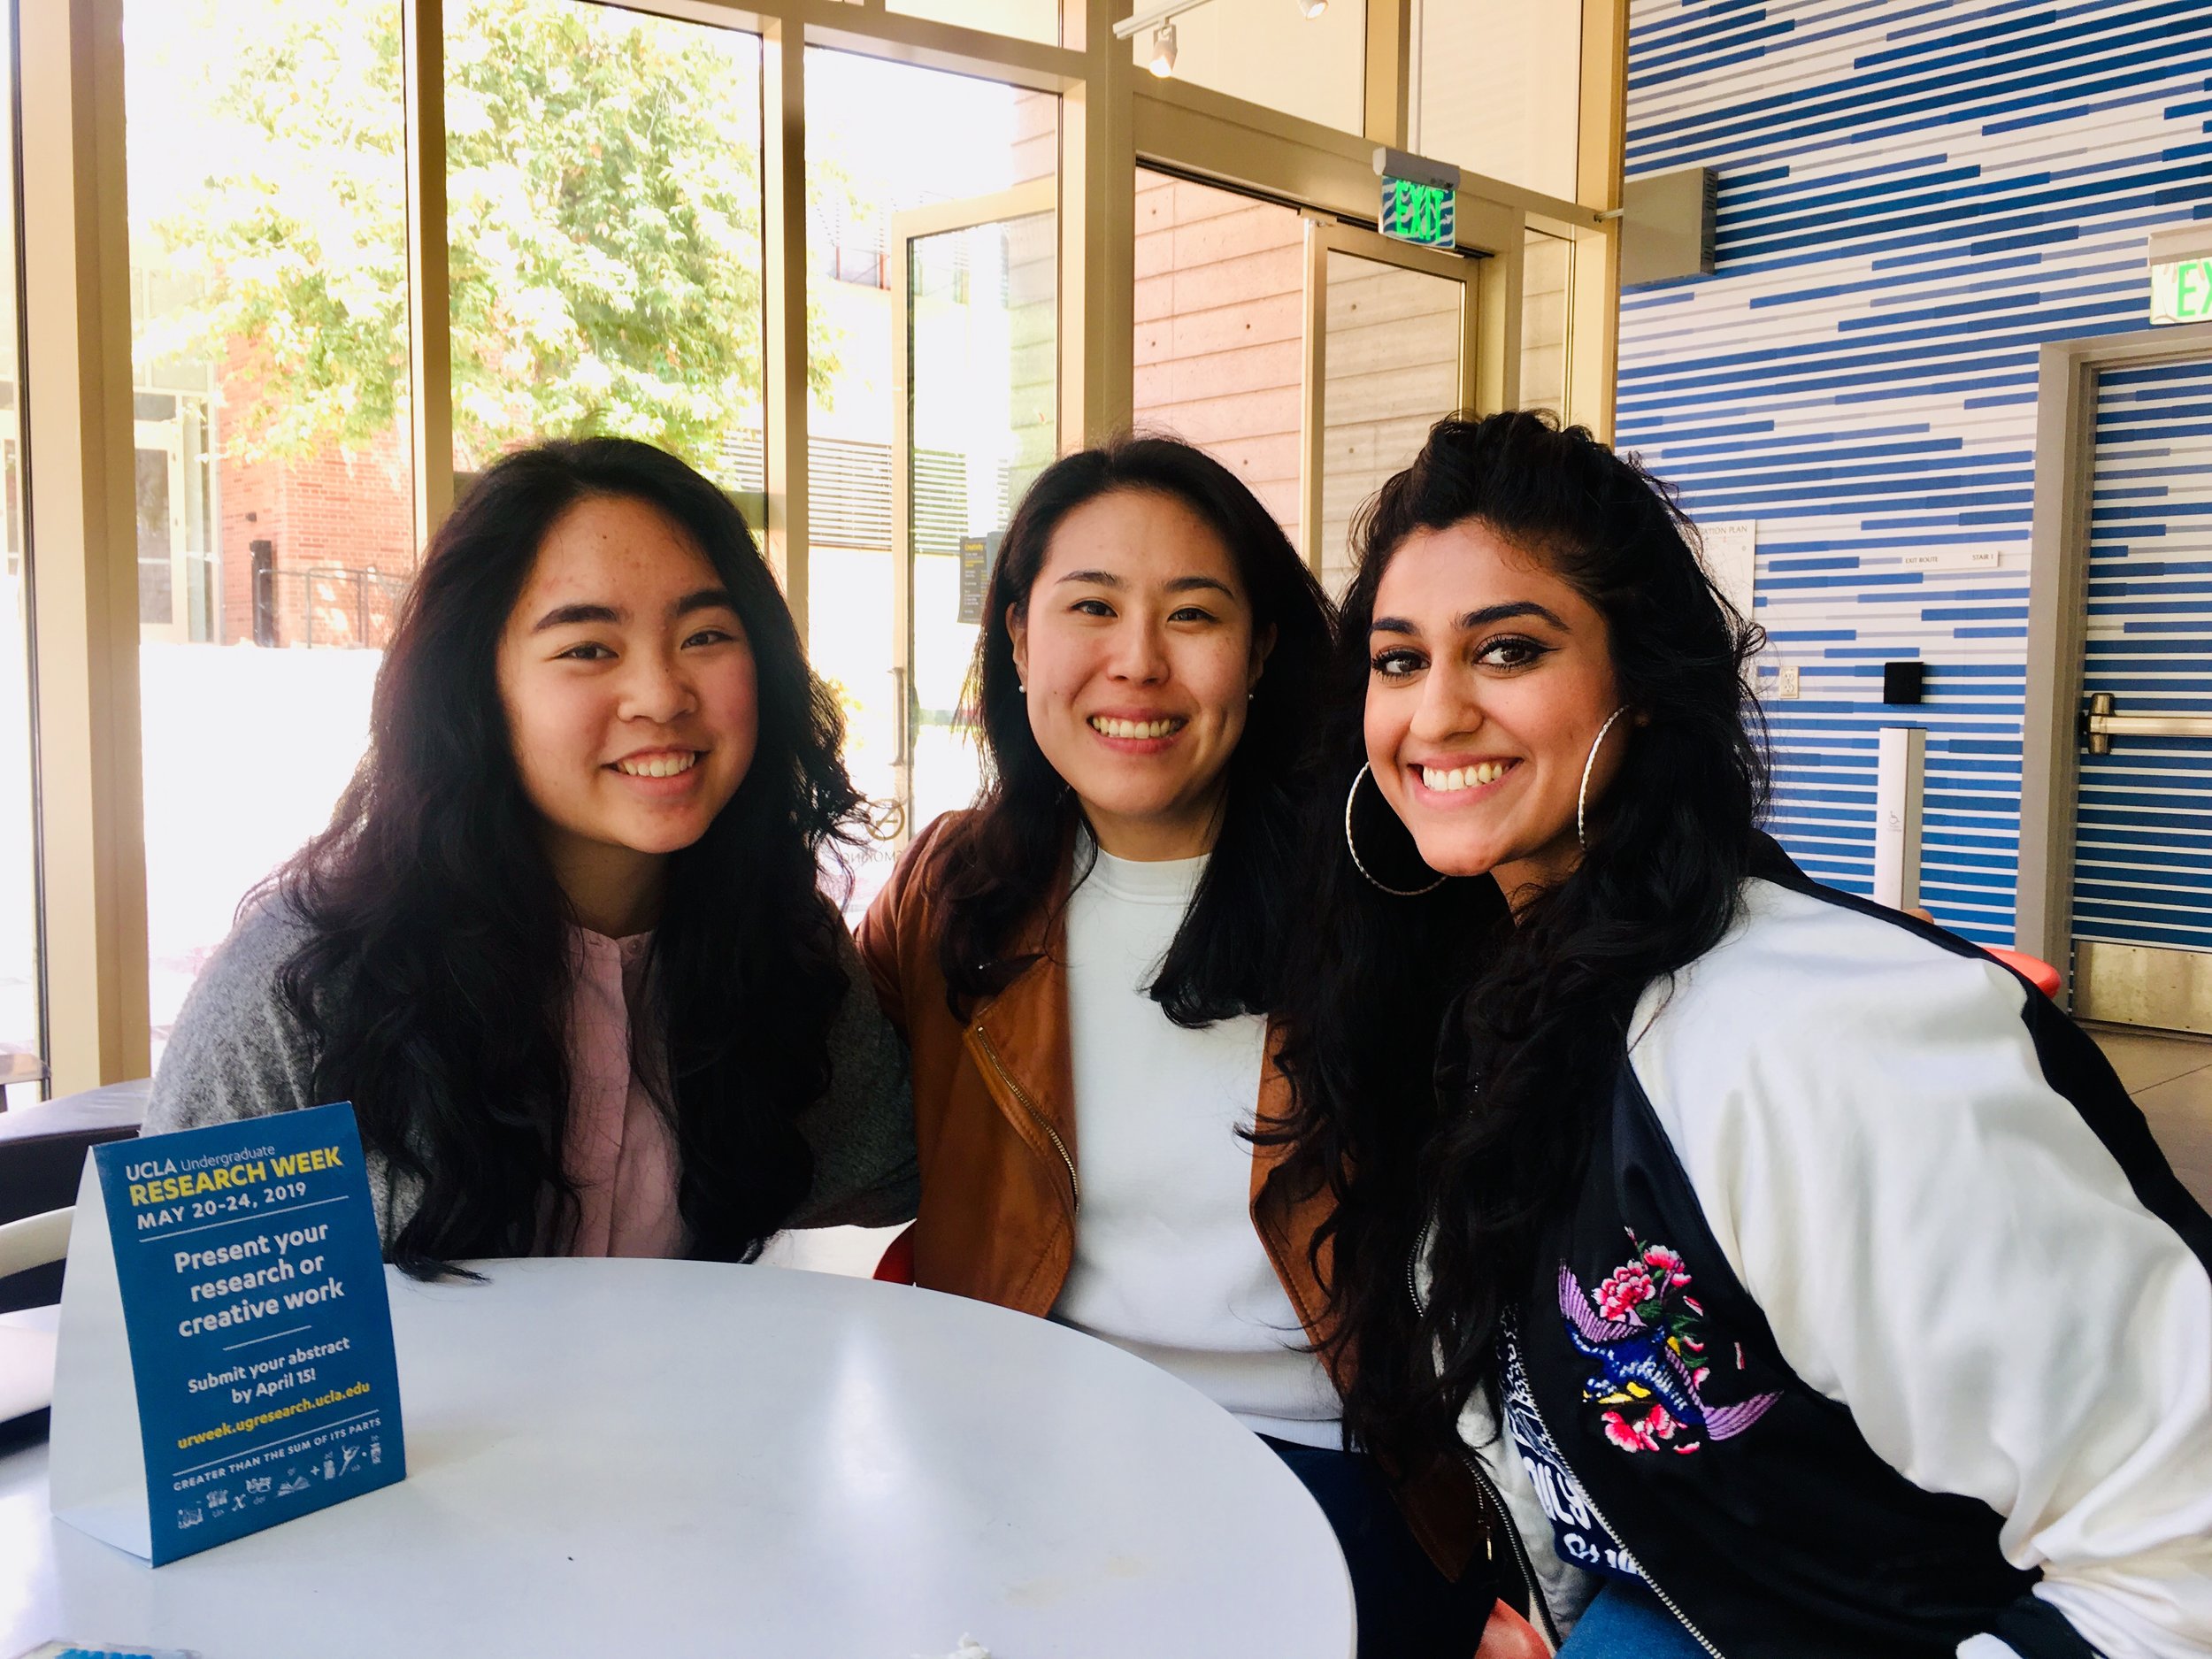  With Emily Pham and Noor Ghatala, two brilliant and vibrant young women studying History and Human Biology &amp; Society at UCLA 